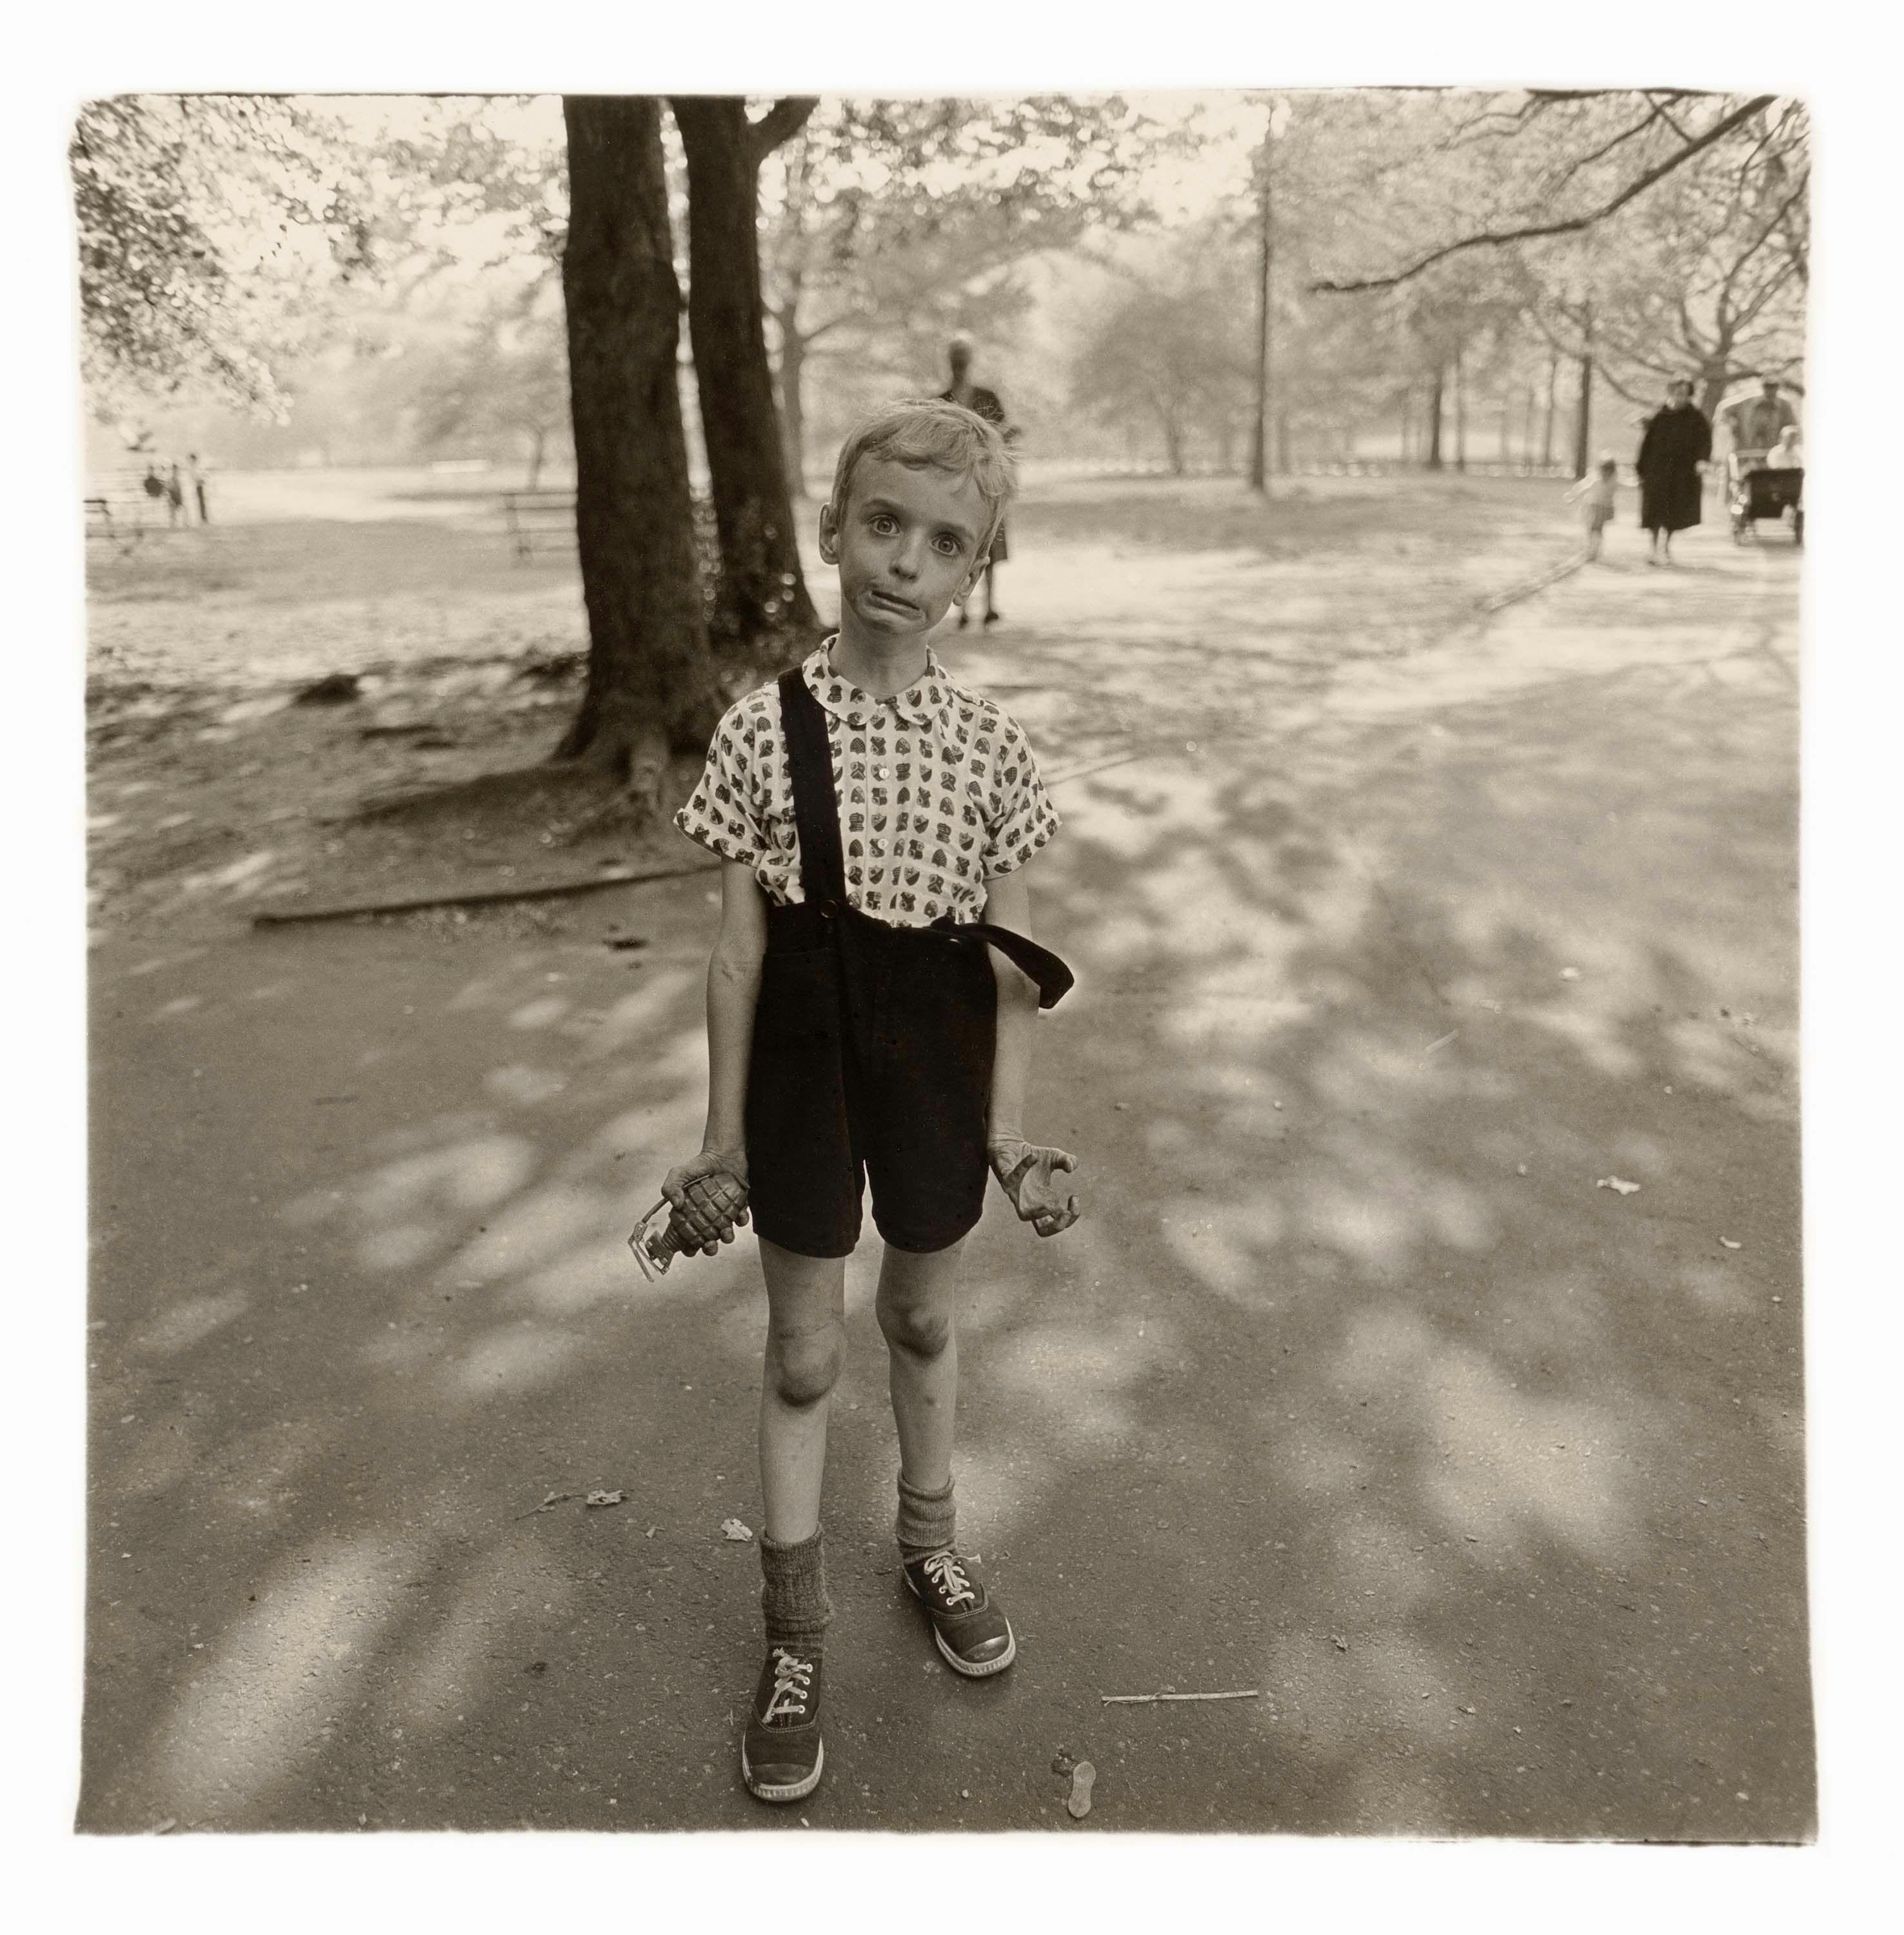 A gelatin silver print by Diane Arbus, titled Child with a toy hand grenade in Central Park, N.Y.C. 1962, dated 1962.